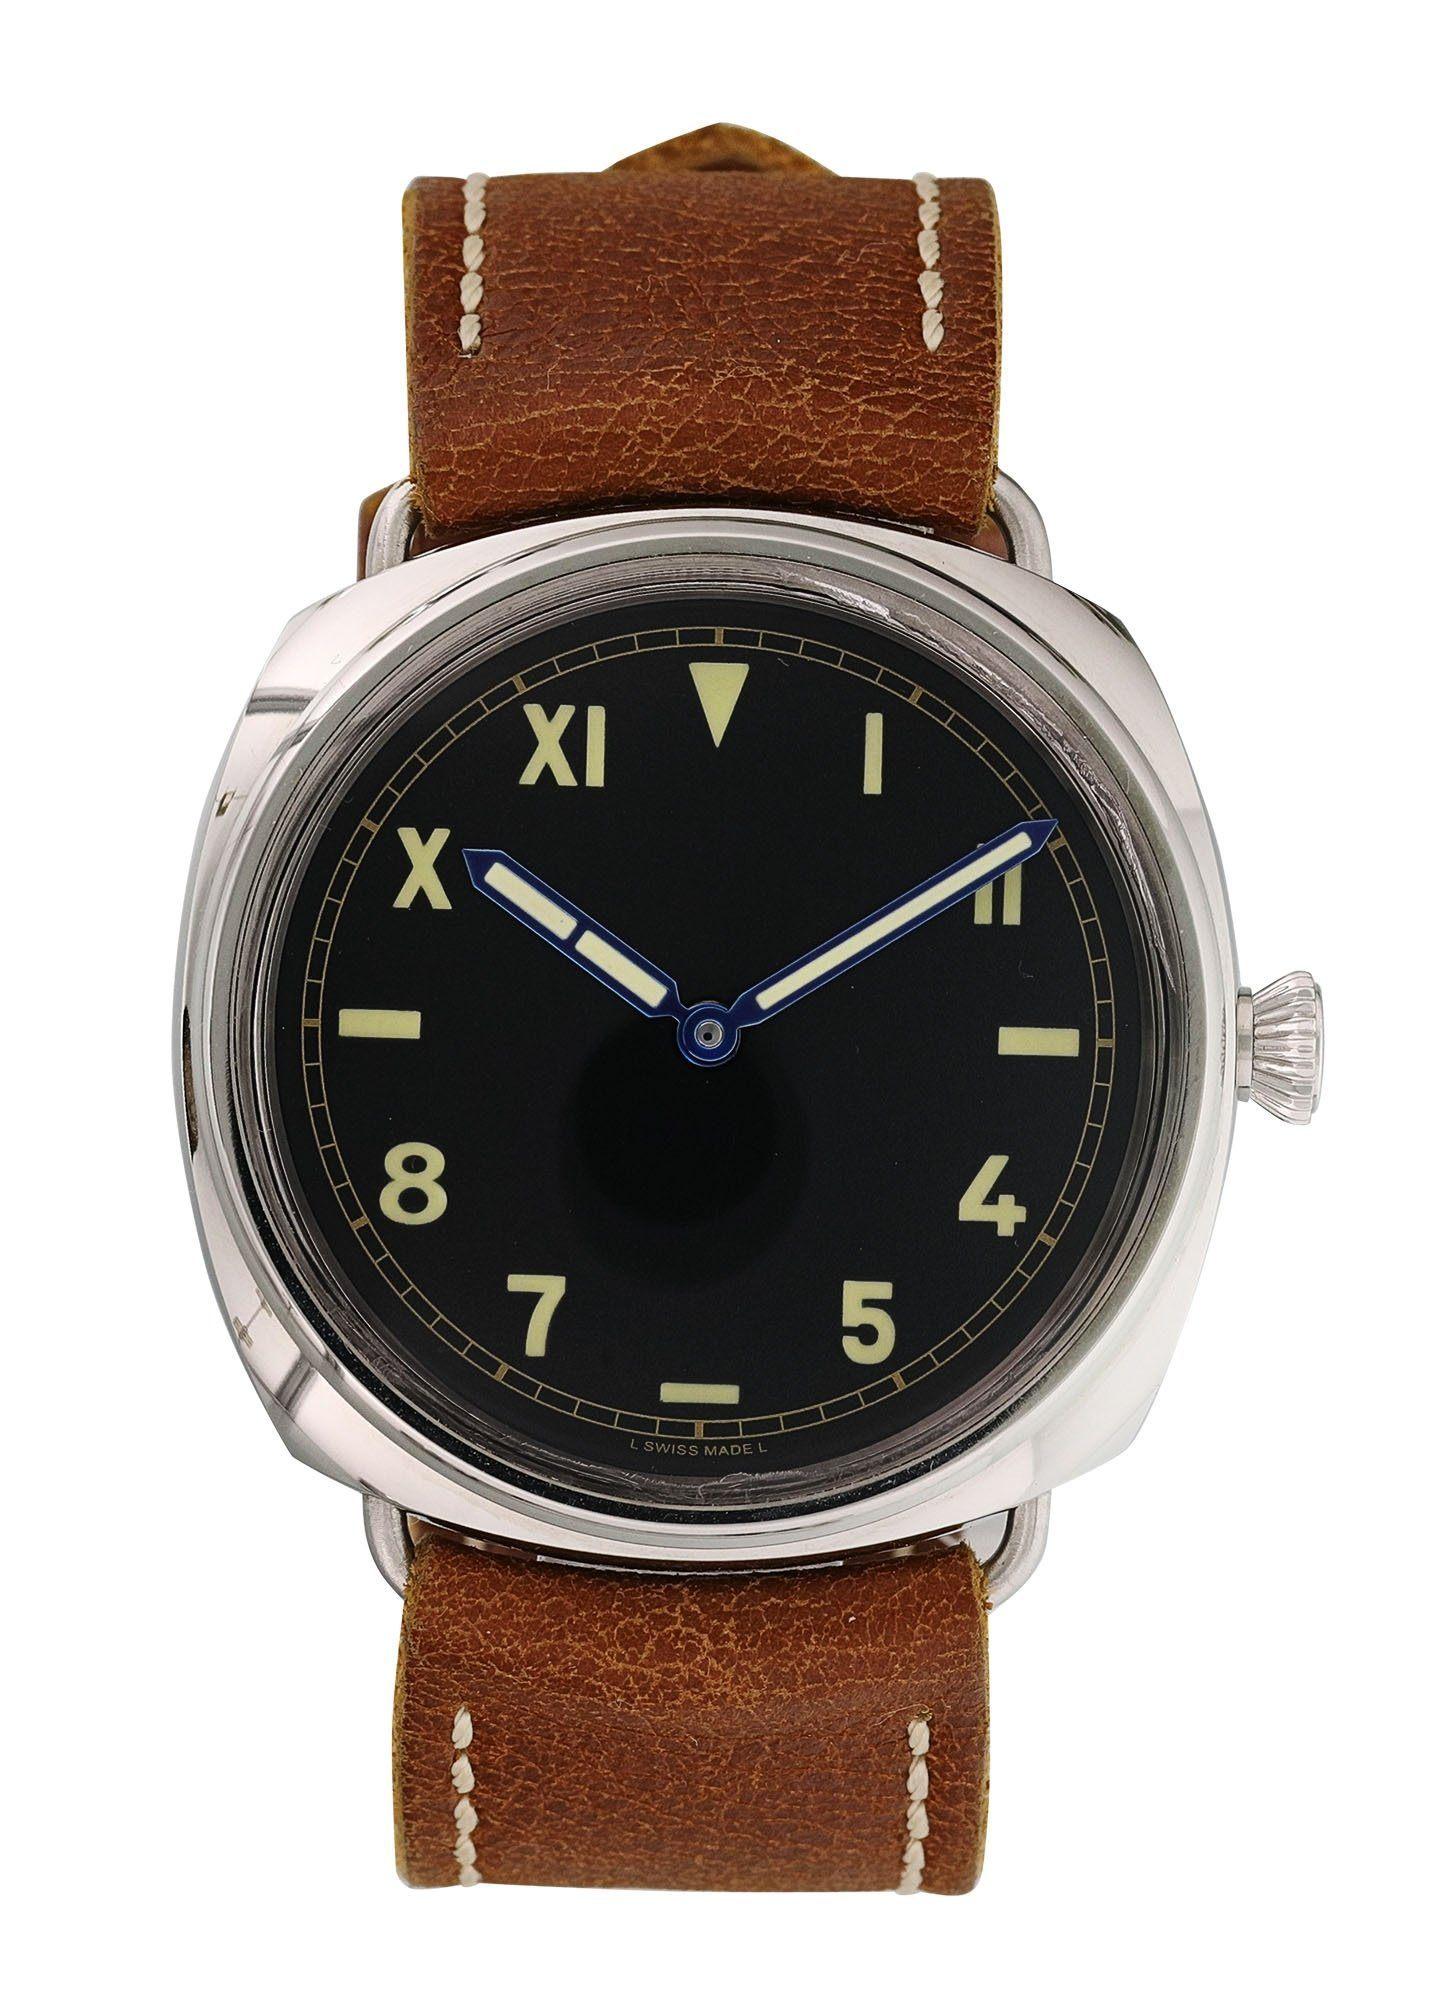 Panerai Radiomir 1936 California Dial PAM00349 Men's Watch.
47mm Stainless Steel case. 
Stainless Steel smooth bezel. 
Black California dial. Minute markers on the outer dial. 
Date display at the 3 o'clock position. 
Leather Strap with Buckle.